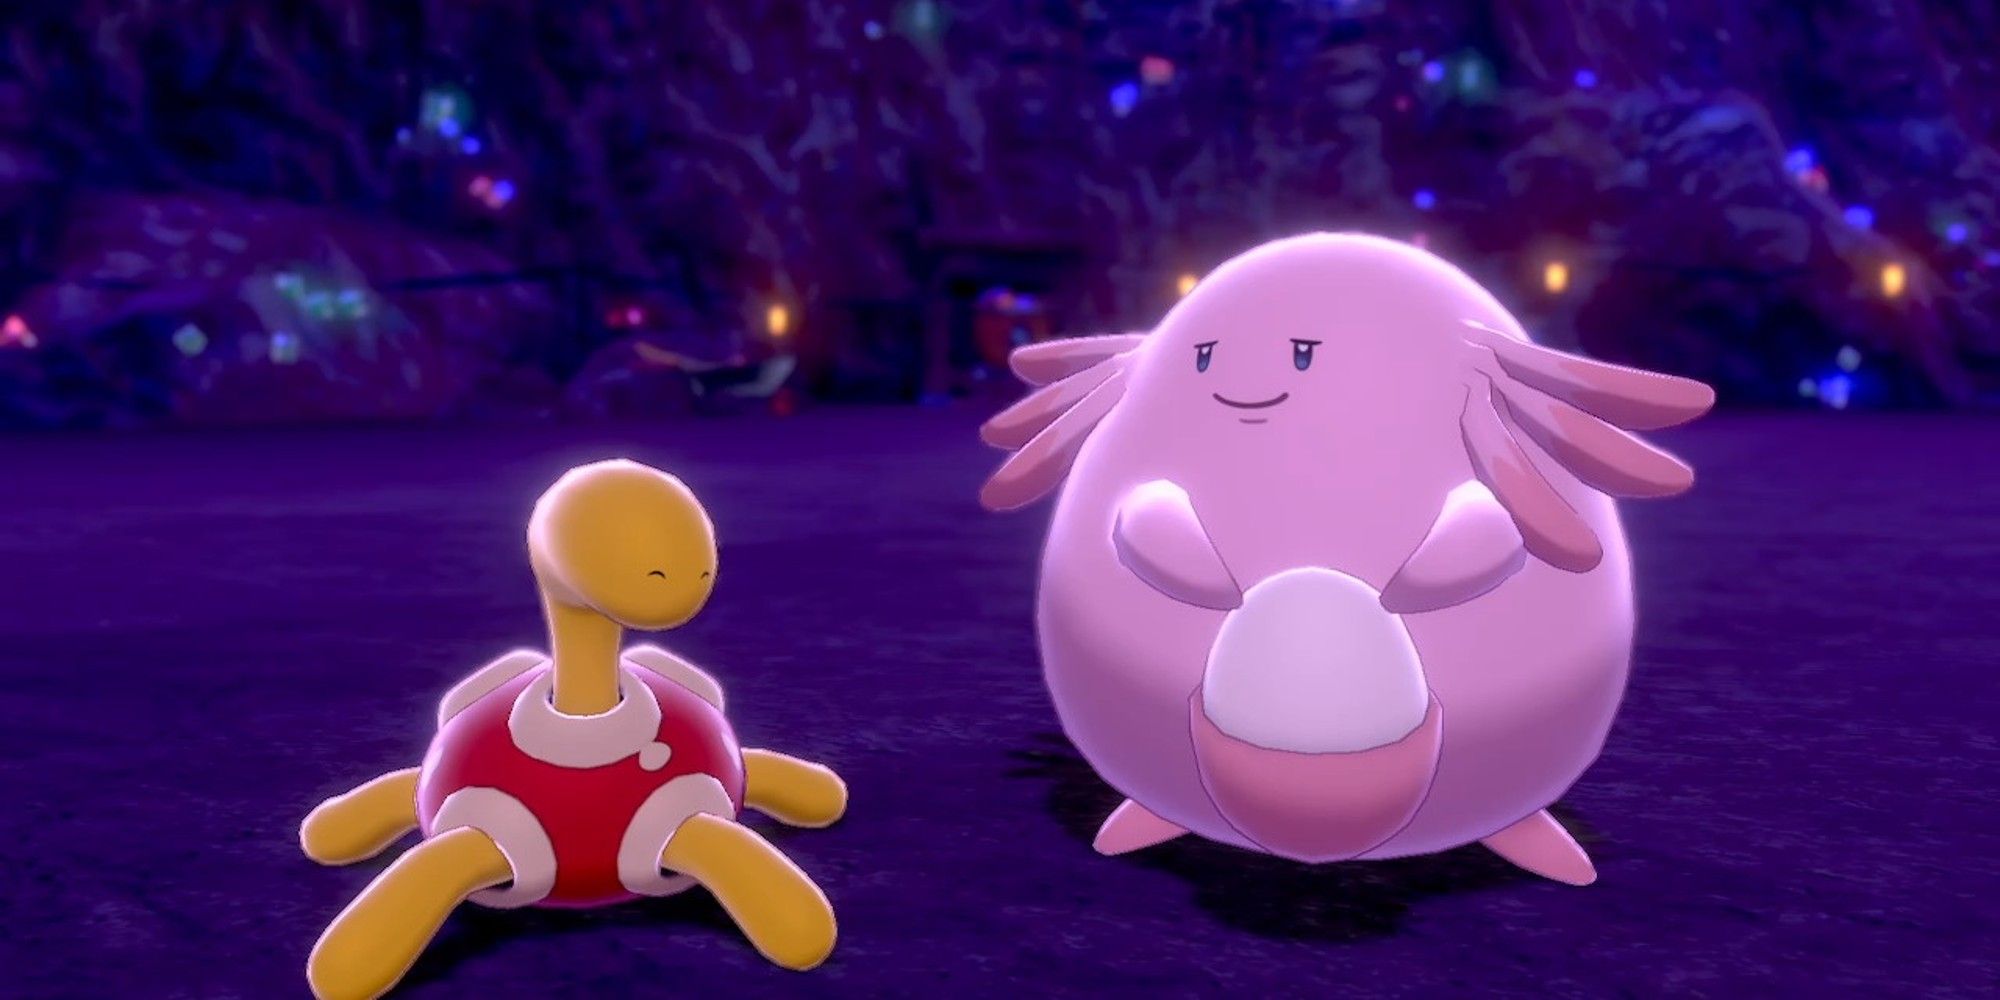 A Shuckle and Chansey in a dark cave. They're mischievously smiling at each other.